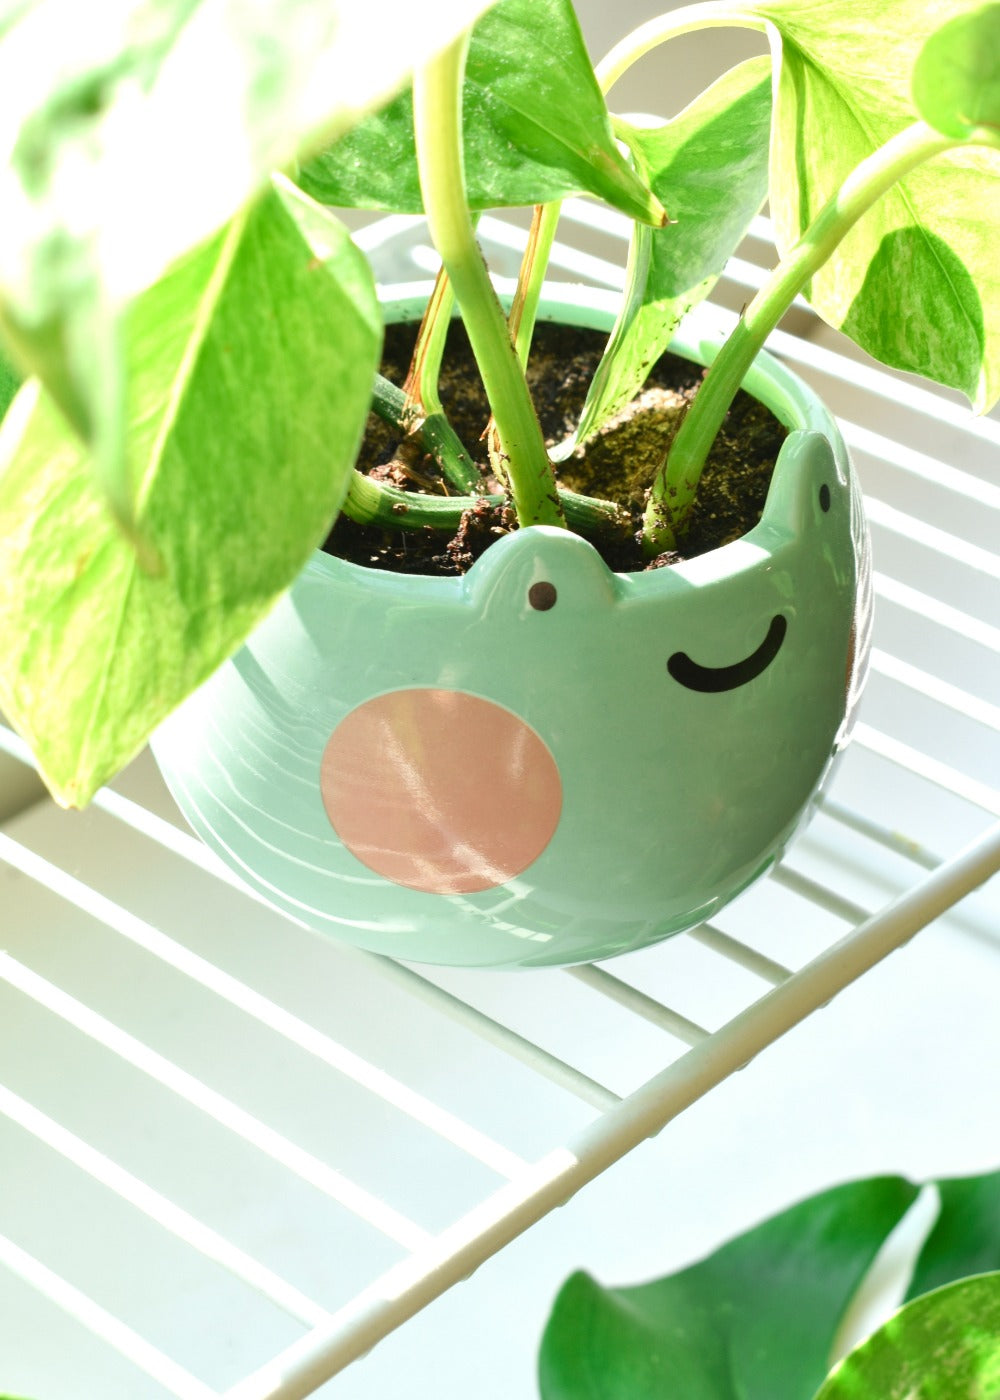 Cute Smile Planter Pot  Kawaii Face Planters with Drainage